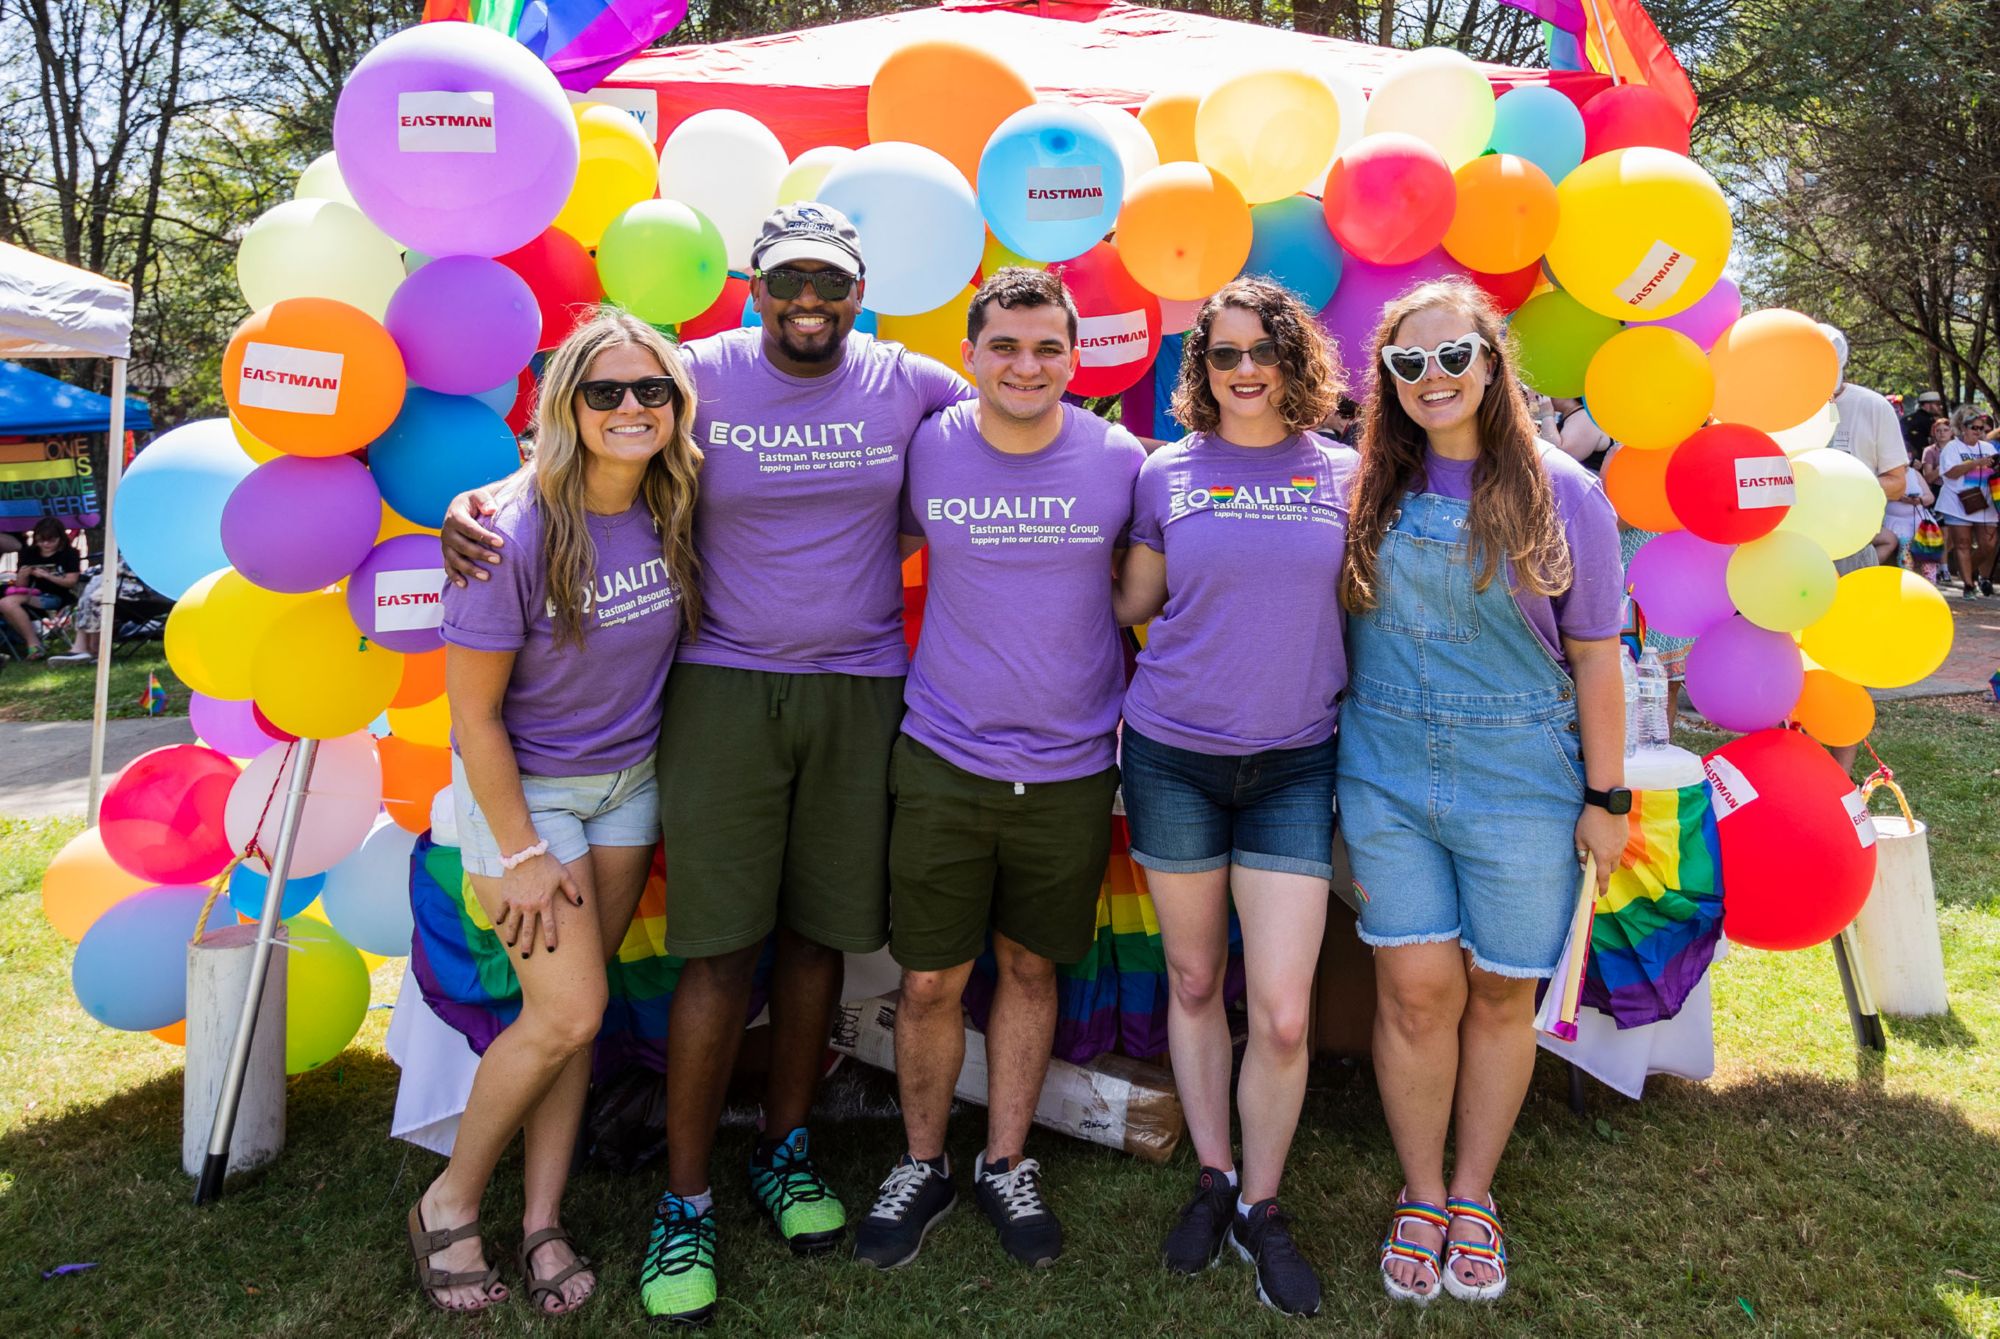 Members of Equality resource group stand in front of Eastman’s booth at TriPride 